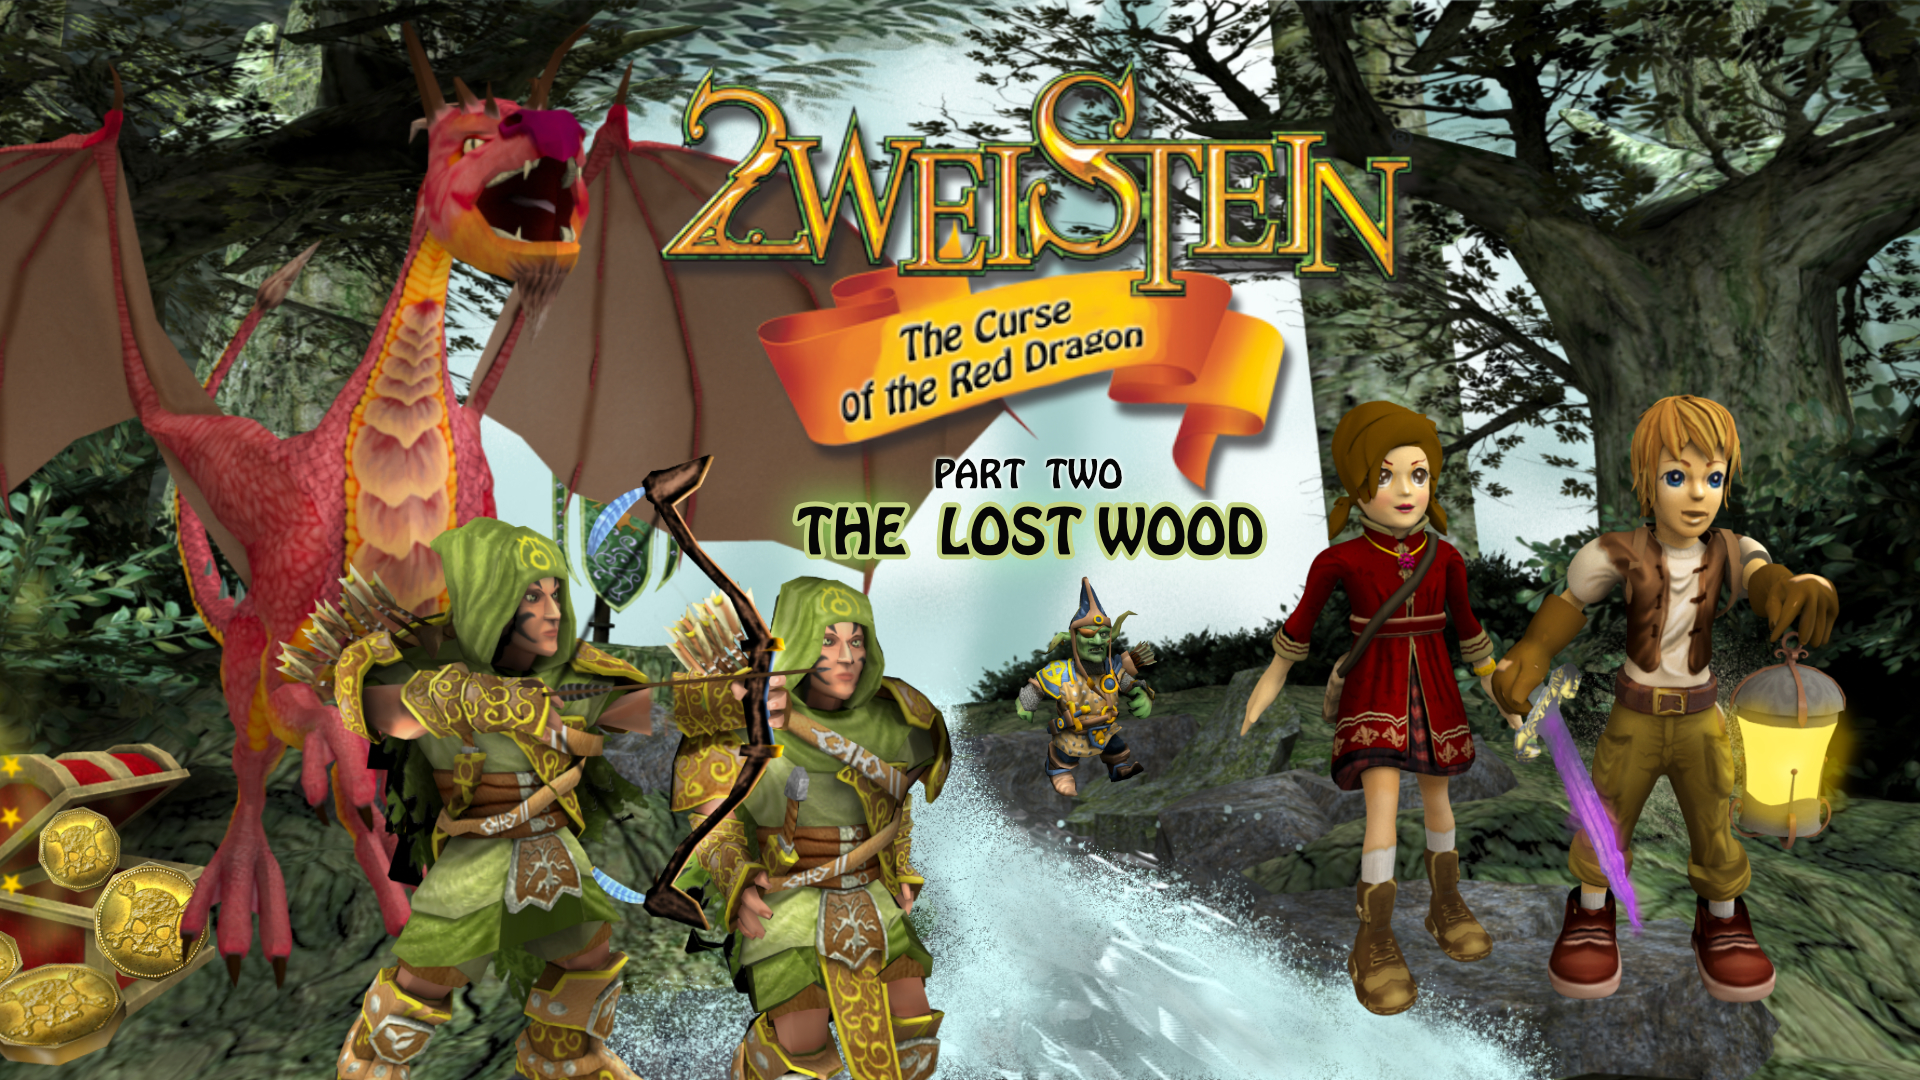 2weistein - The Curse of the Red Dragon 2